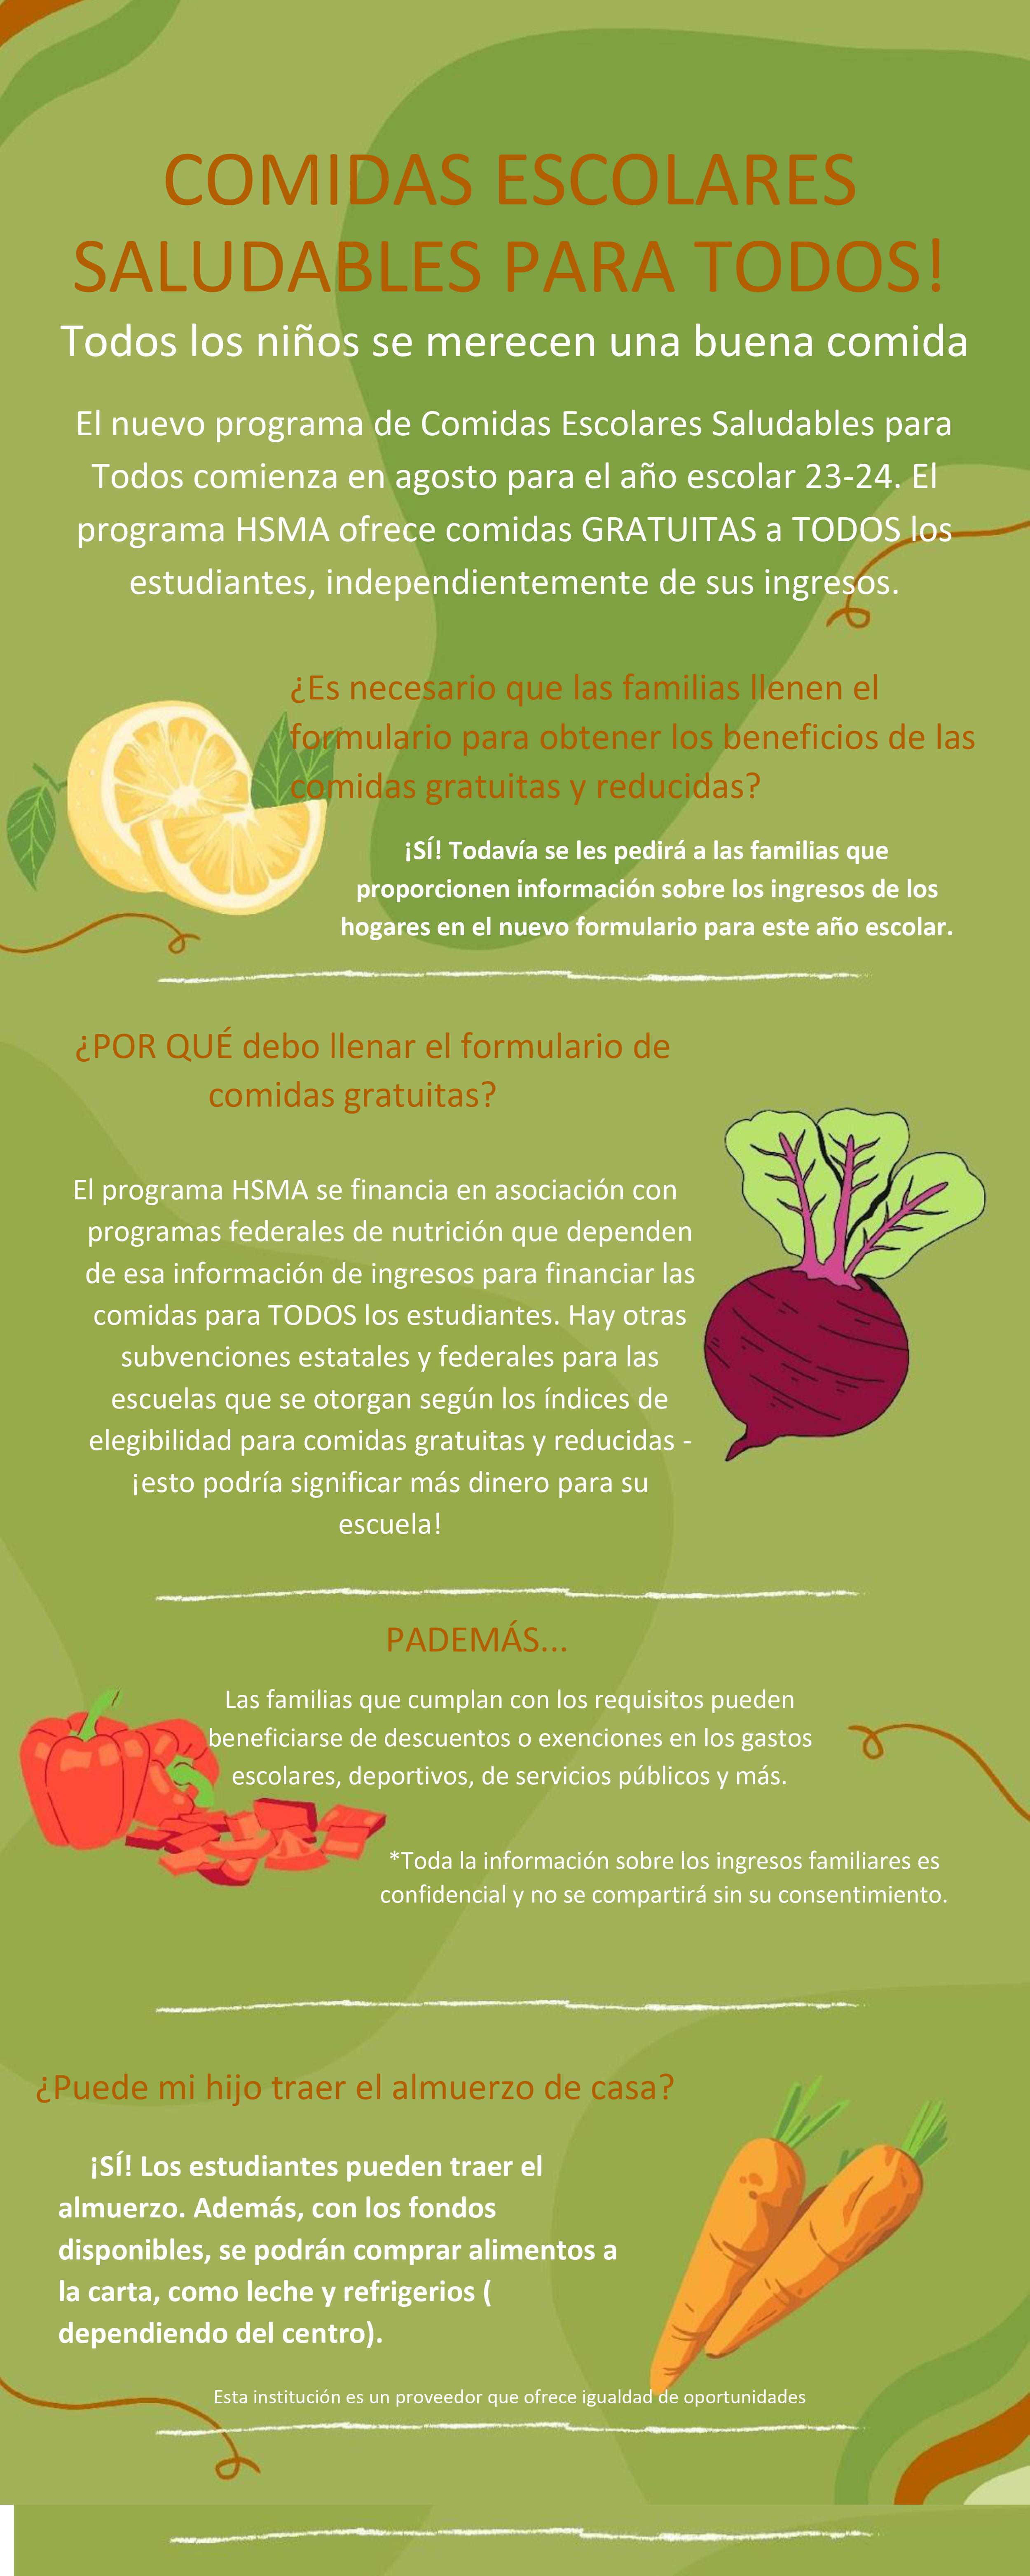 Healthy School Meals for All SPANISH (Final).jpg